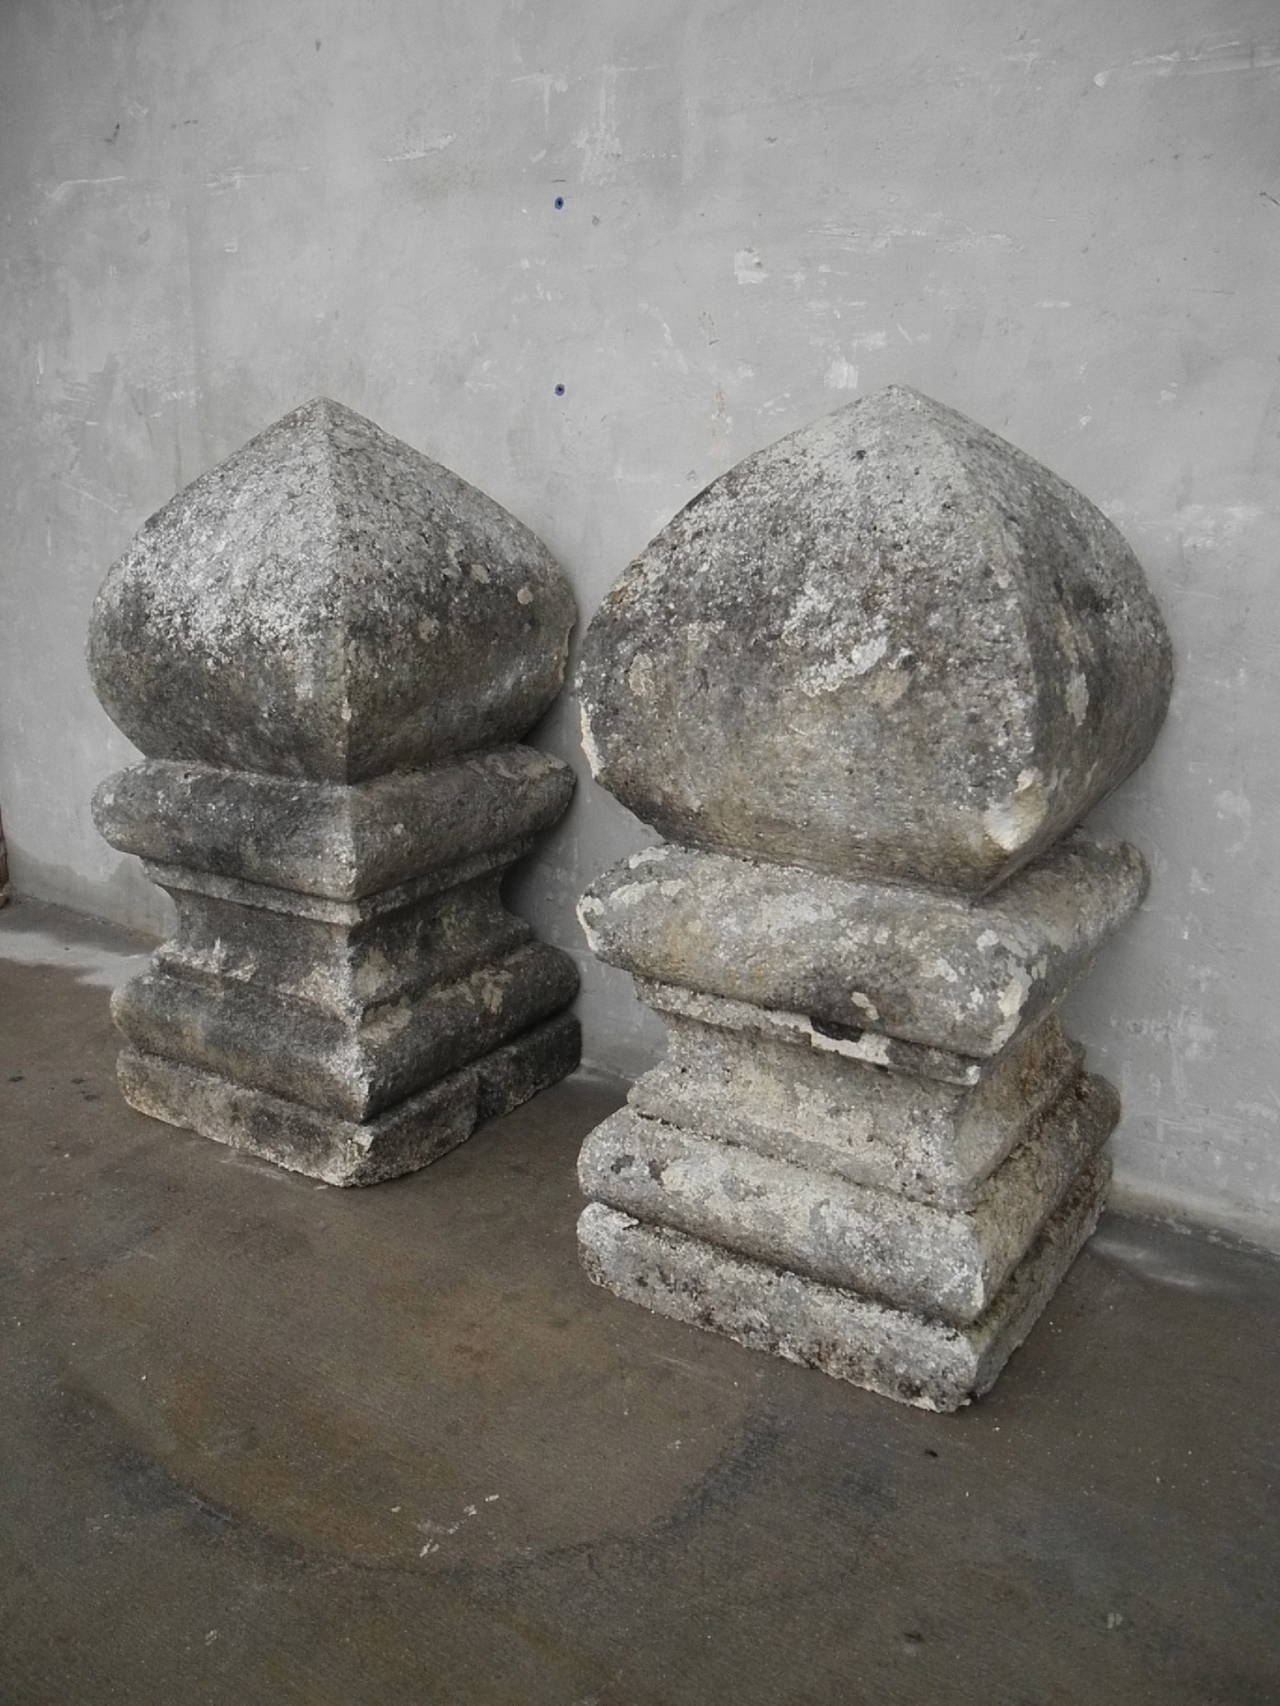 This pair of early 19th century stone finials originally guarded the entrance to a property in Montendre, a commune in the Poitou-Charentes region of France. These substantial pieces are solid, carved stone and sport a beautiful, mottled gray